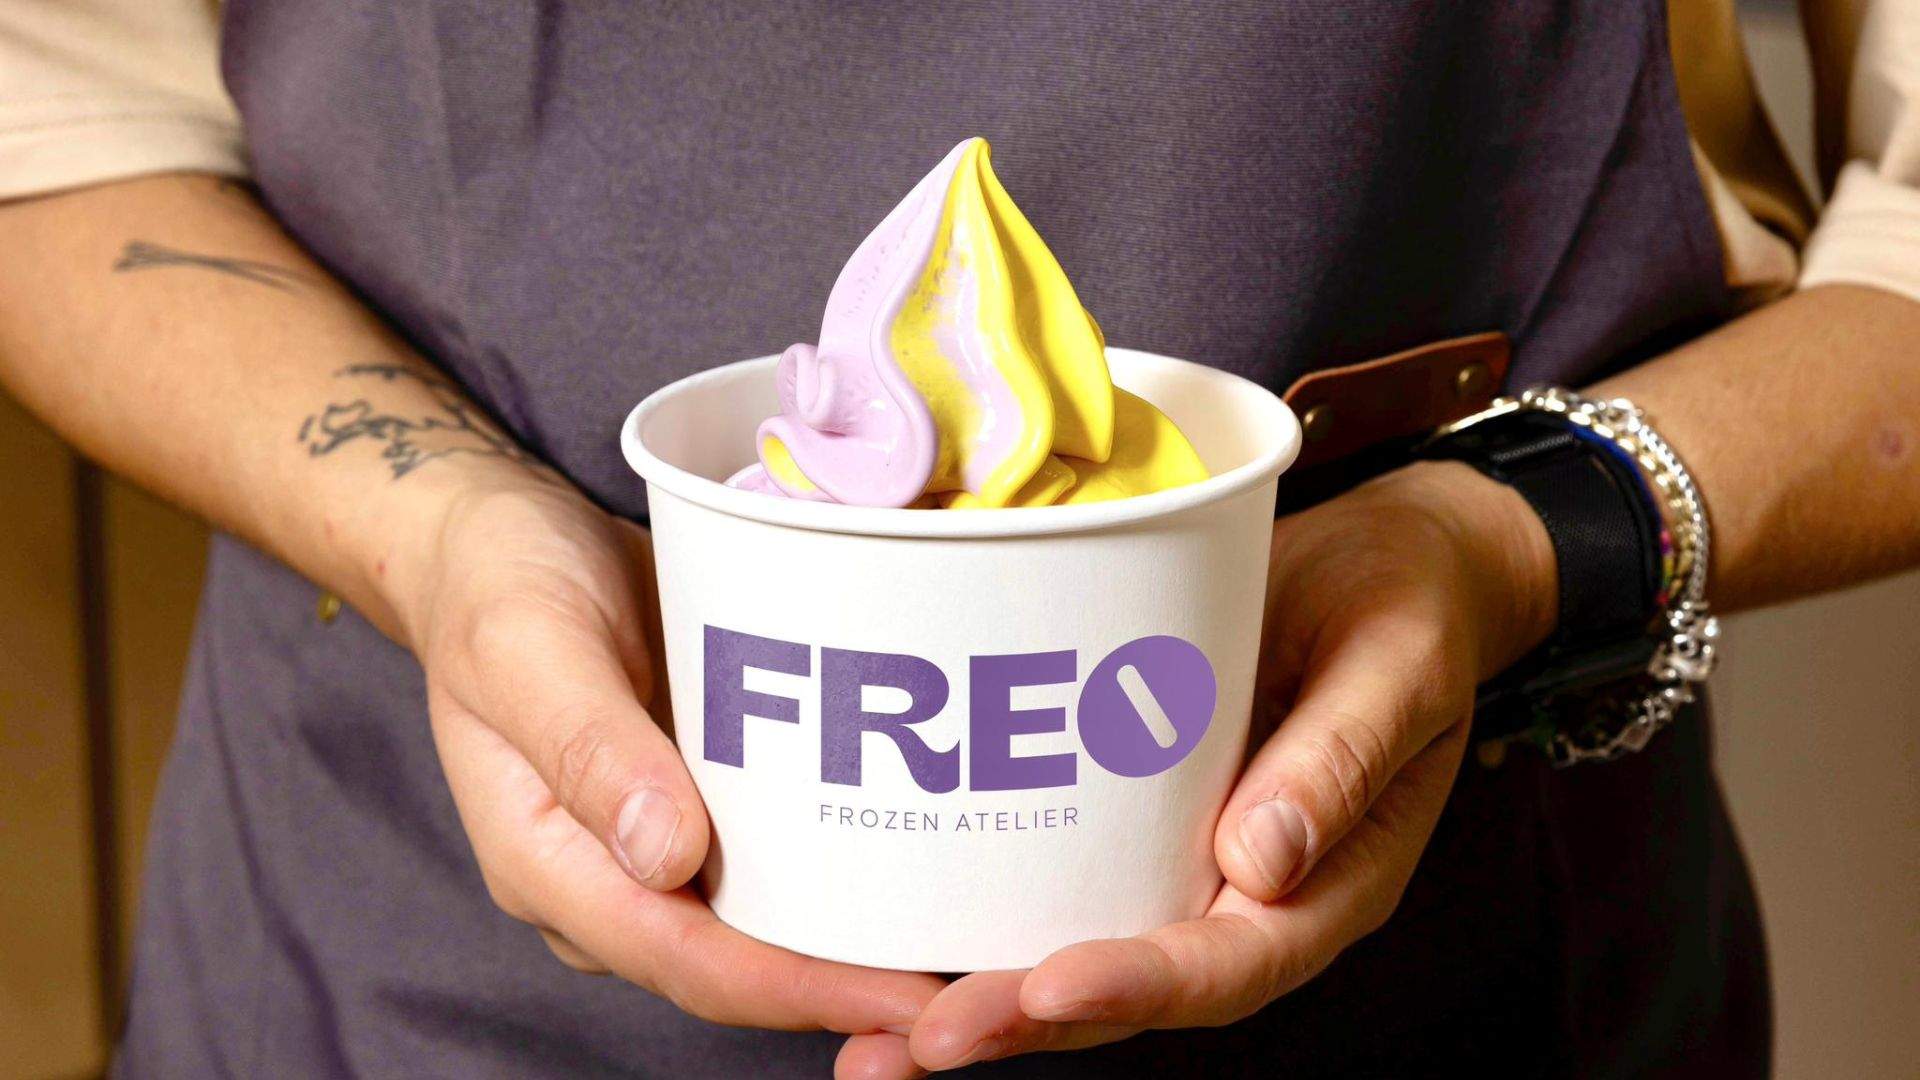 Froyo Is Back: This Frozen Yoghurt Atelier Is Serving up a Revamped Take on the Sweet Treat